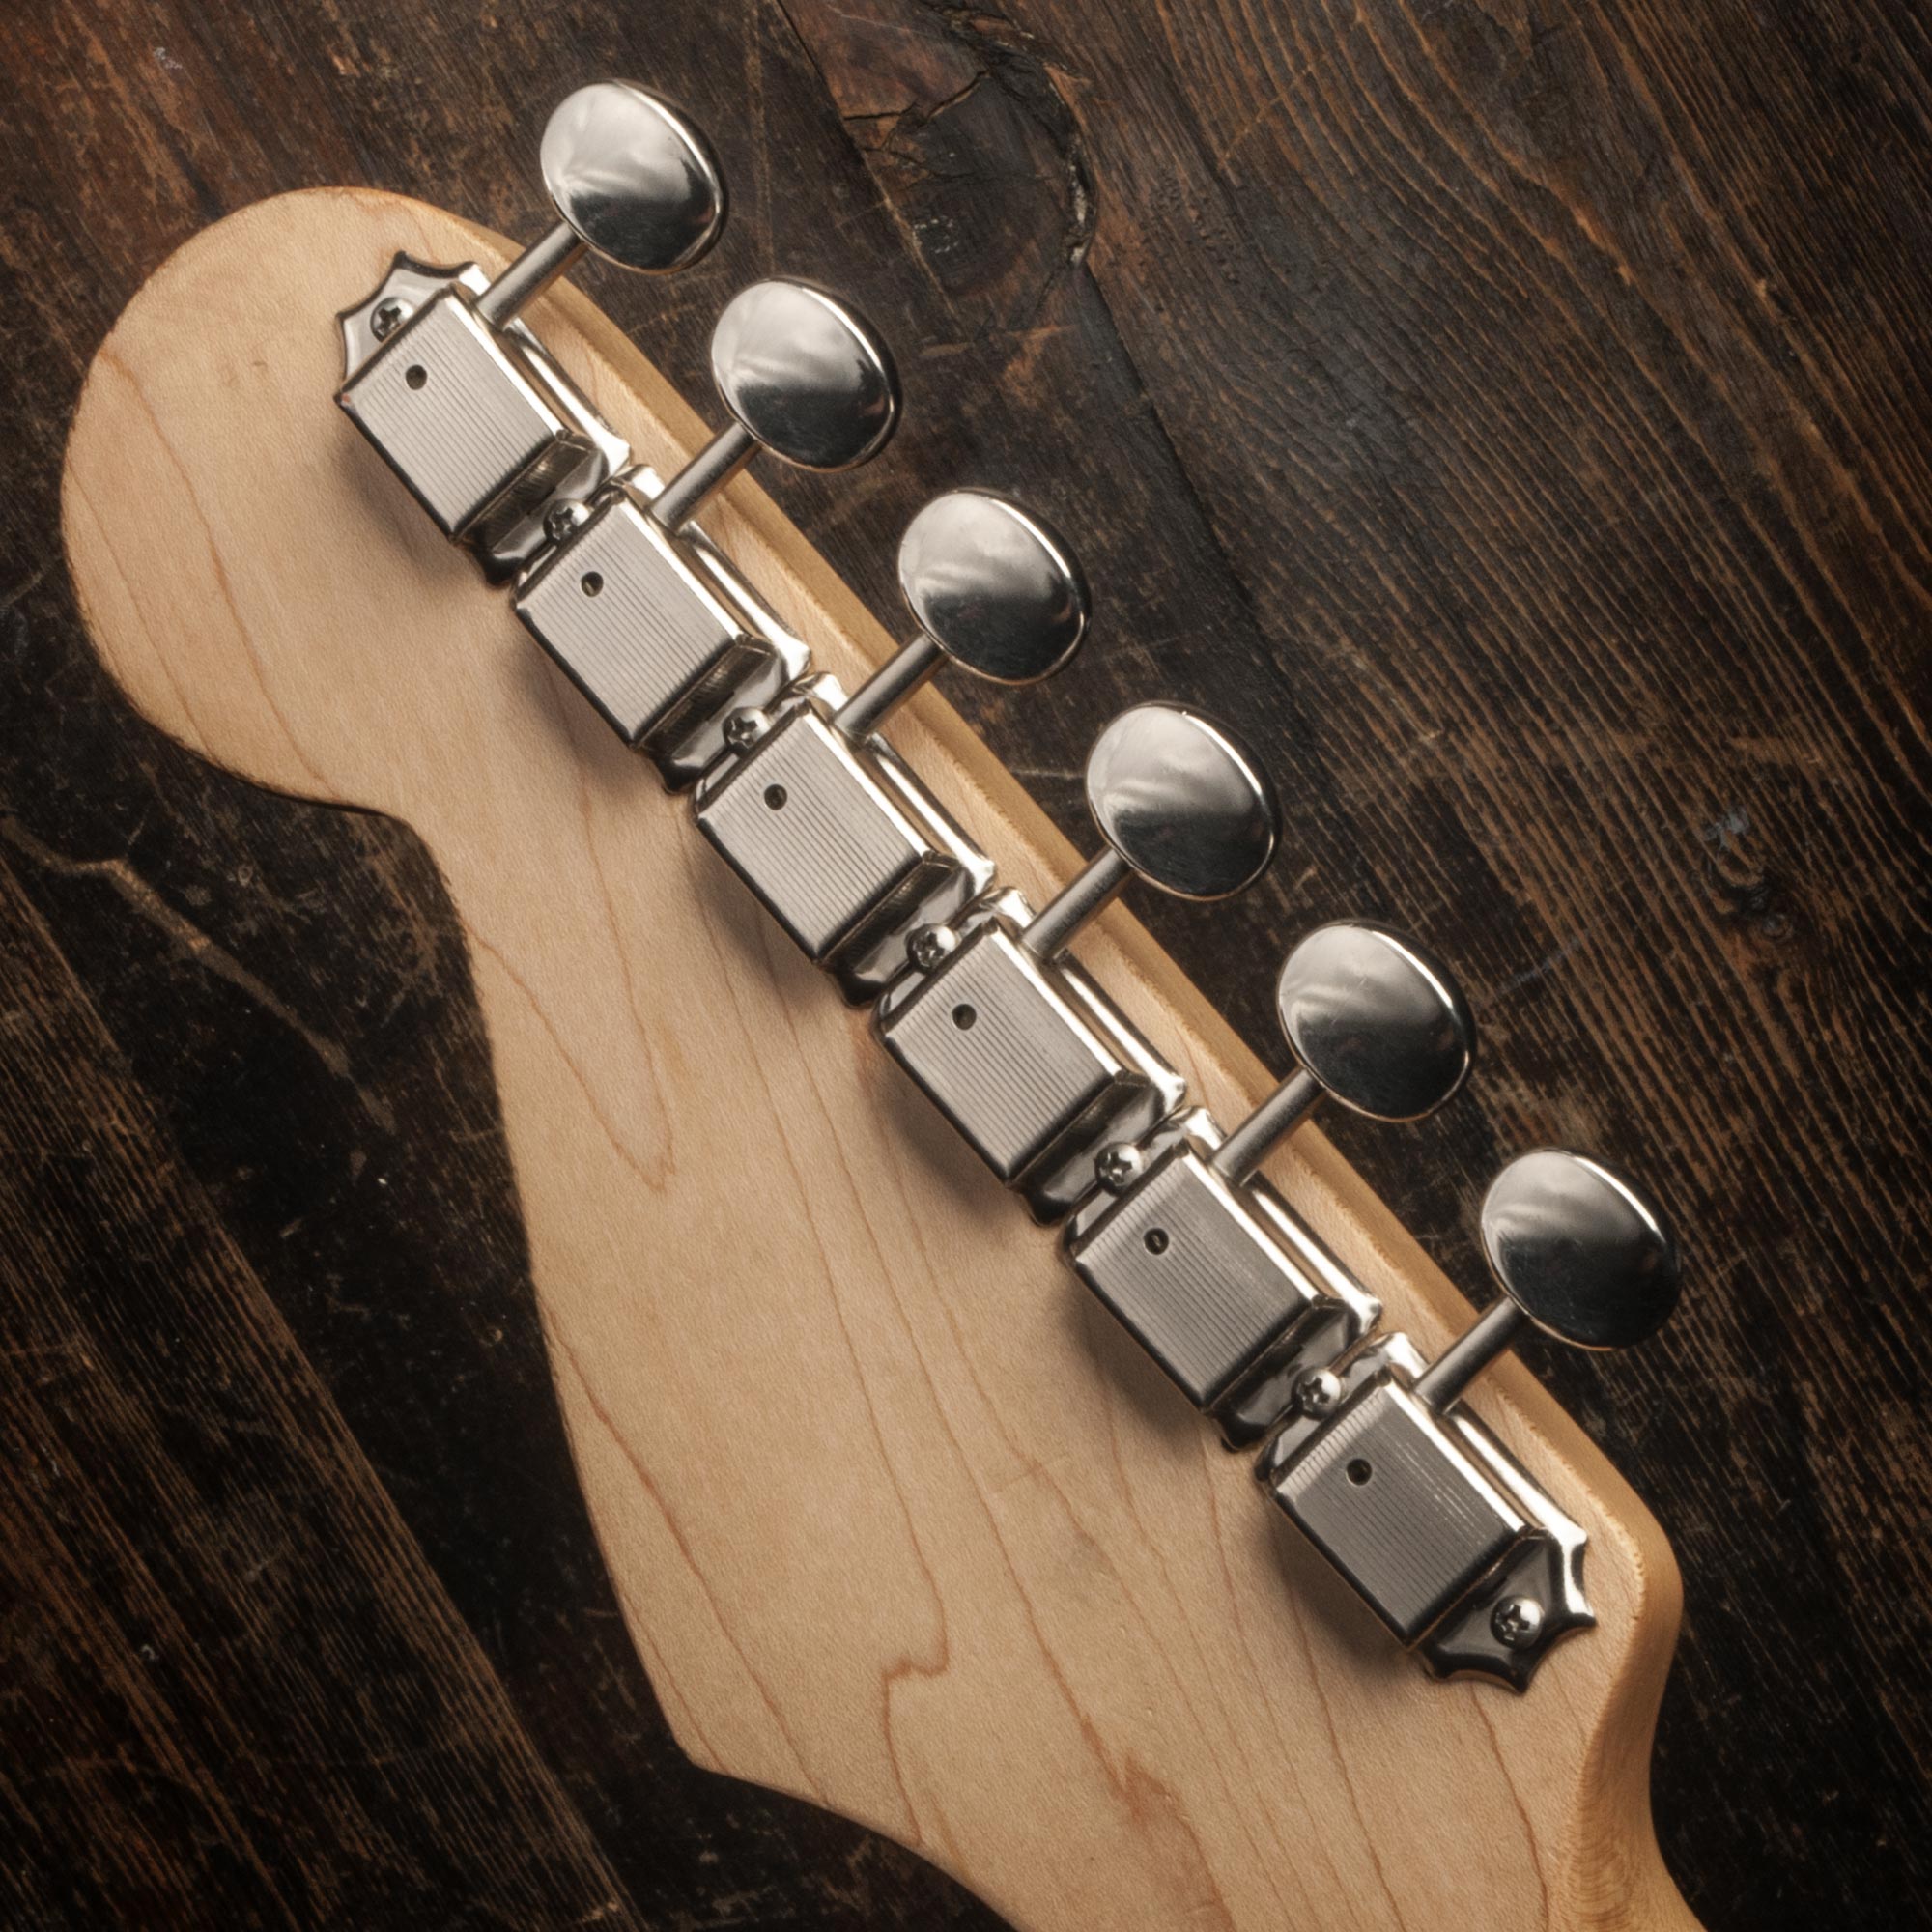 Gotoh Staggered-Height 6-In-Line Tuners